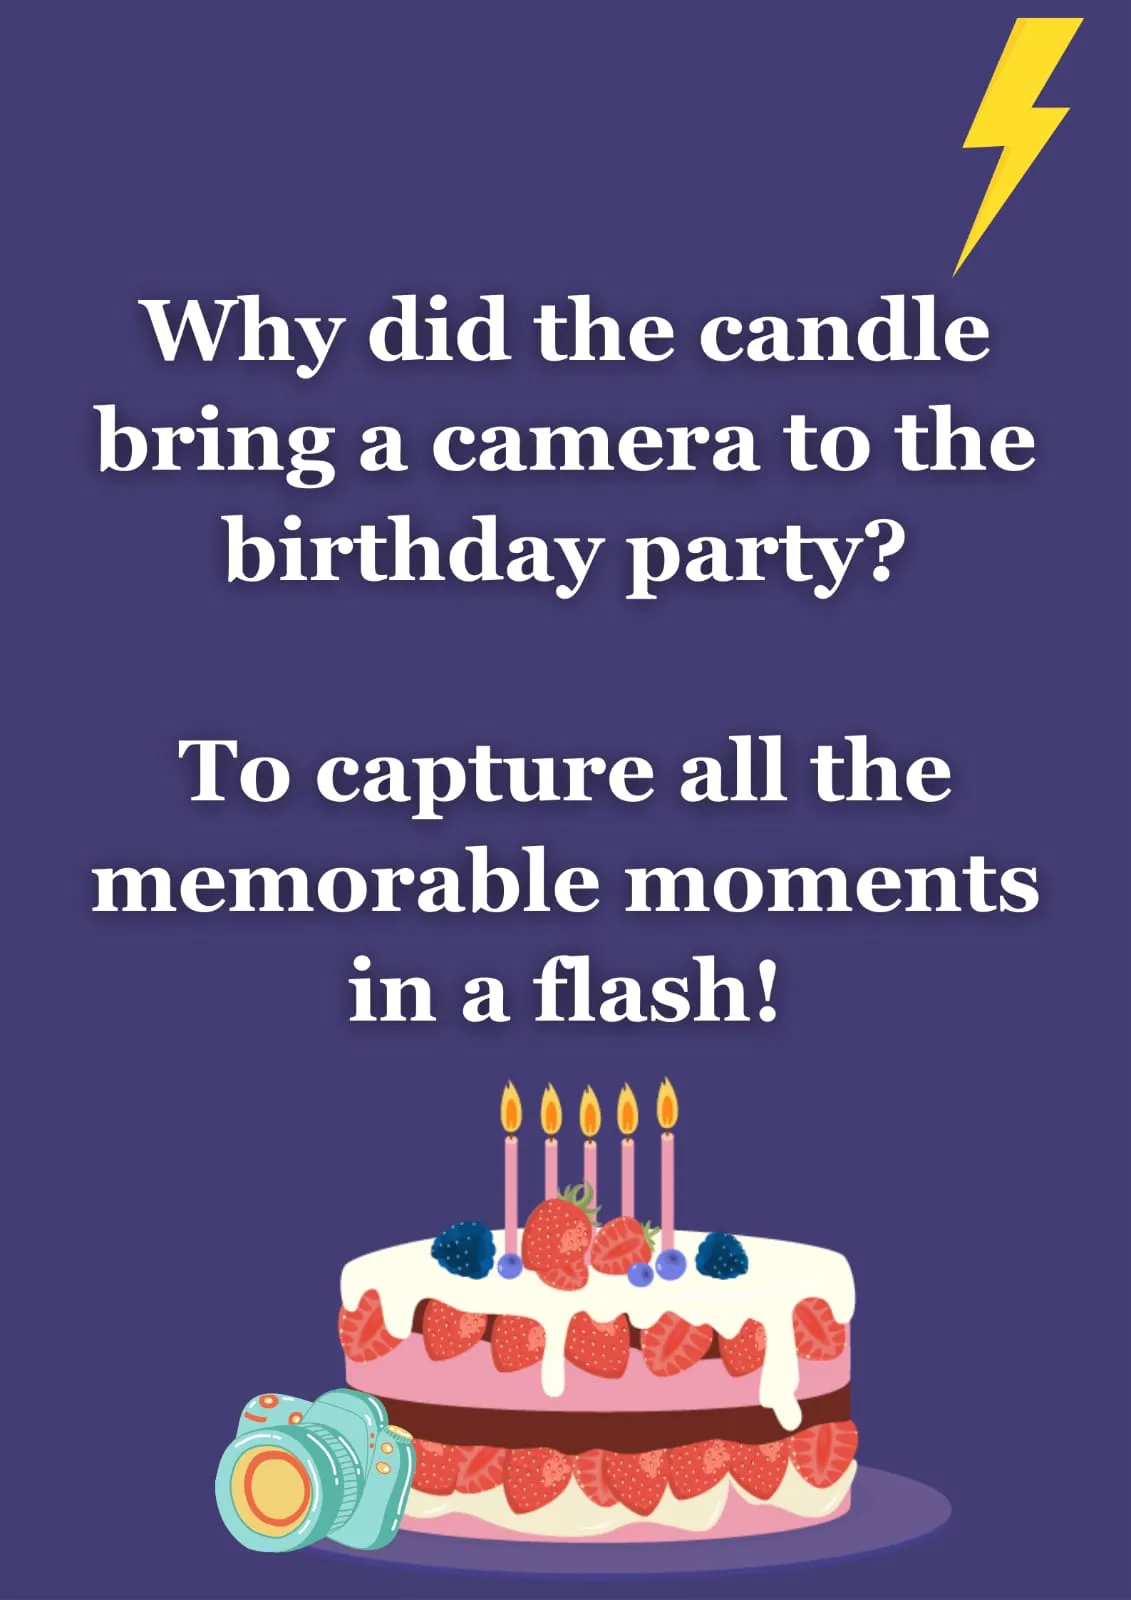 why did the candle bring a camera to the birthday party?